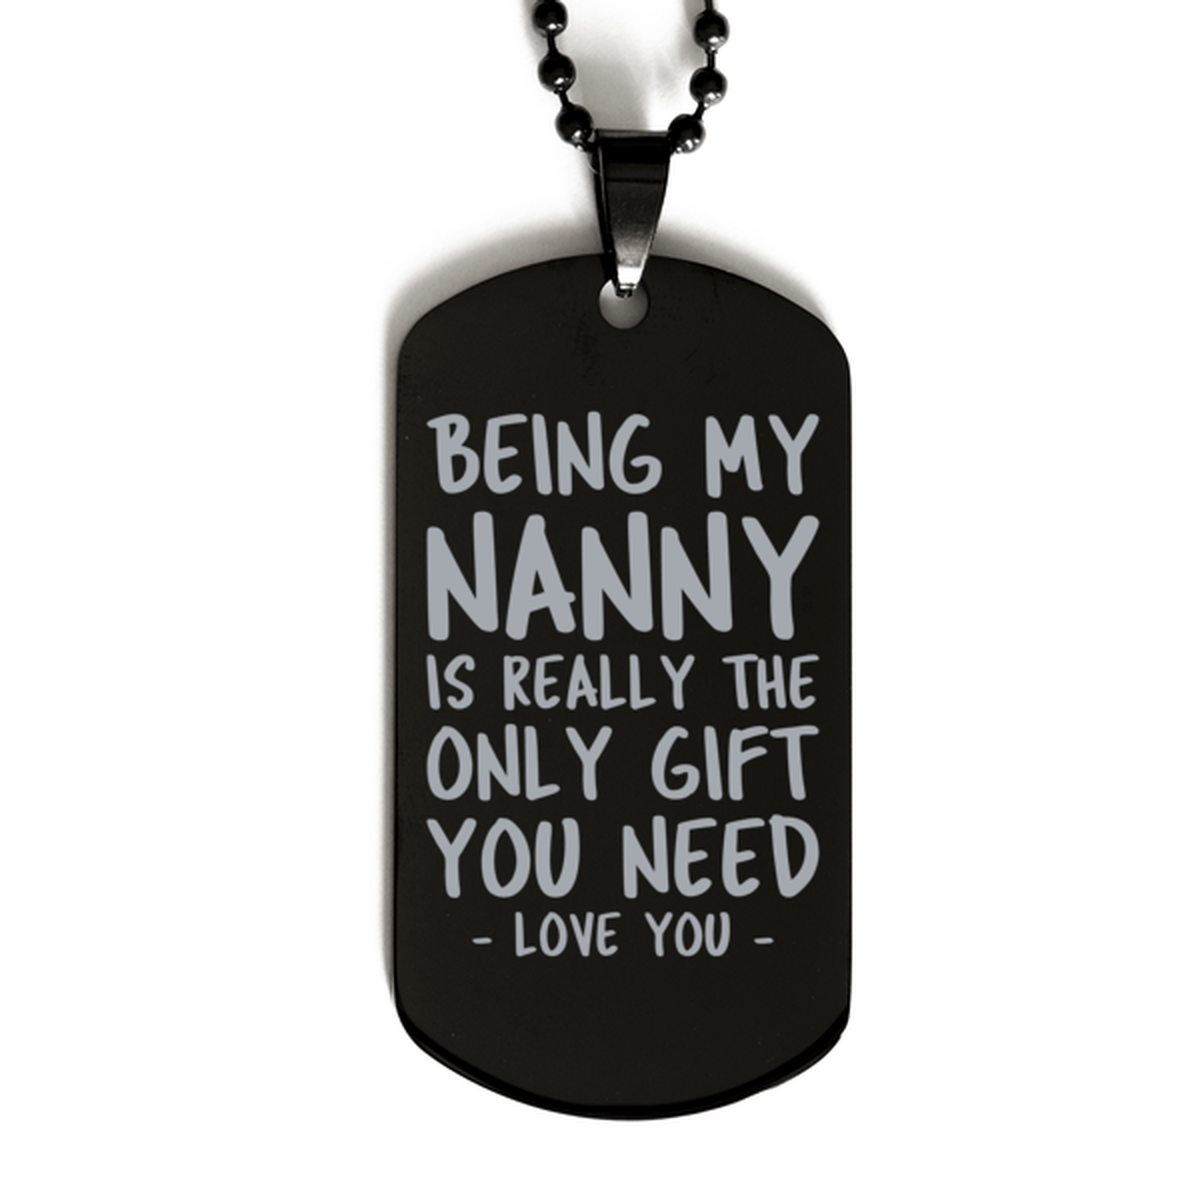 Funny Nanny Black Dog Tag Necklace, Being My Nanny Is Really the Only Gift You Need, Best Birthday Gifts for Nanny